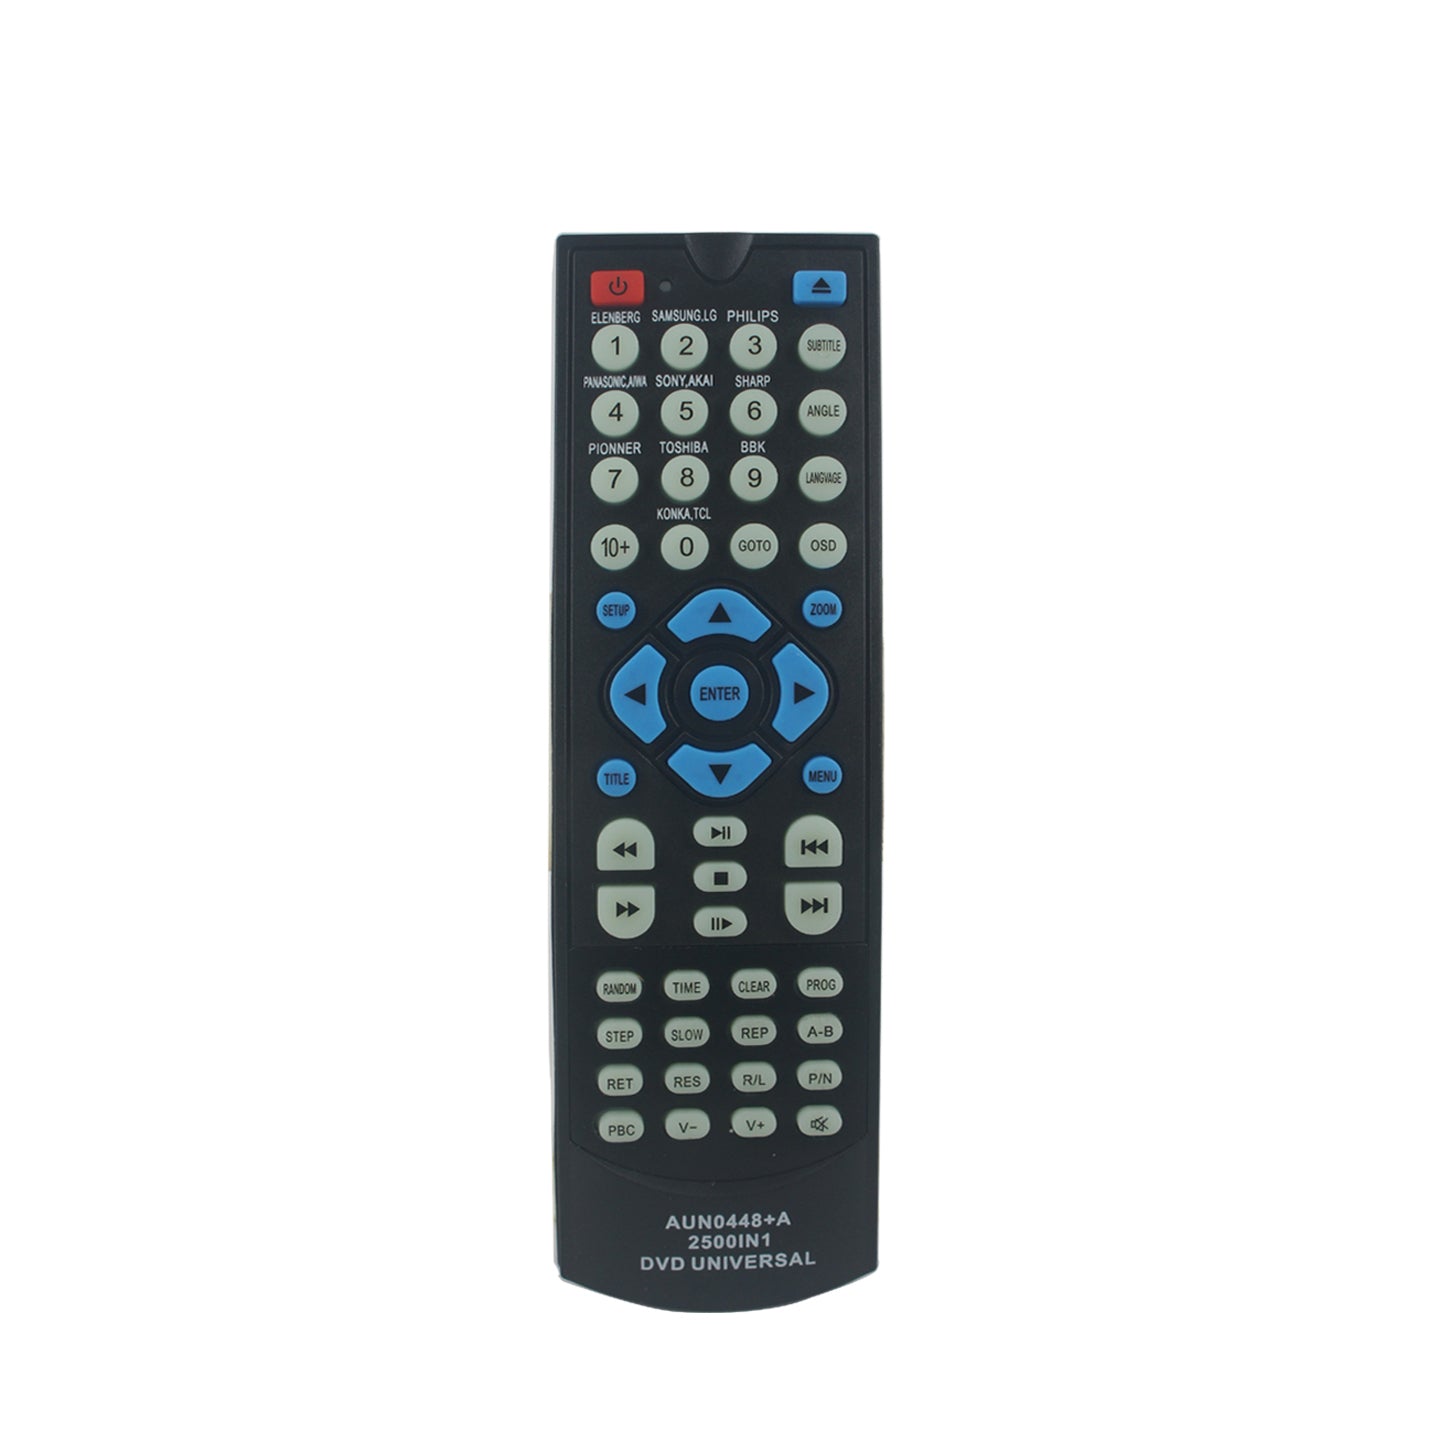 AUN0448+A 2500-in-1 Universal DVD Player Remote Control Compatible with LG Samsung Sony Pioneer Toshiba Panansonic Philips Dawoo Sharp Yamaha Royal